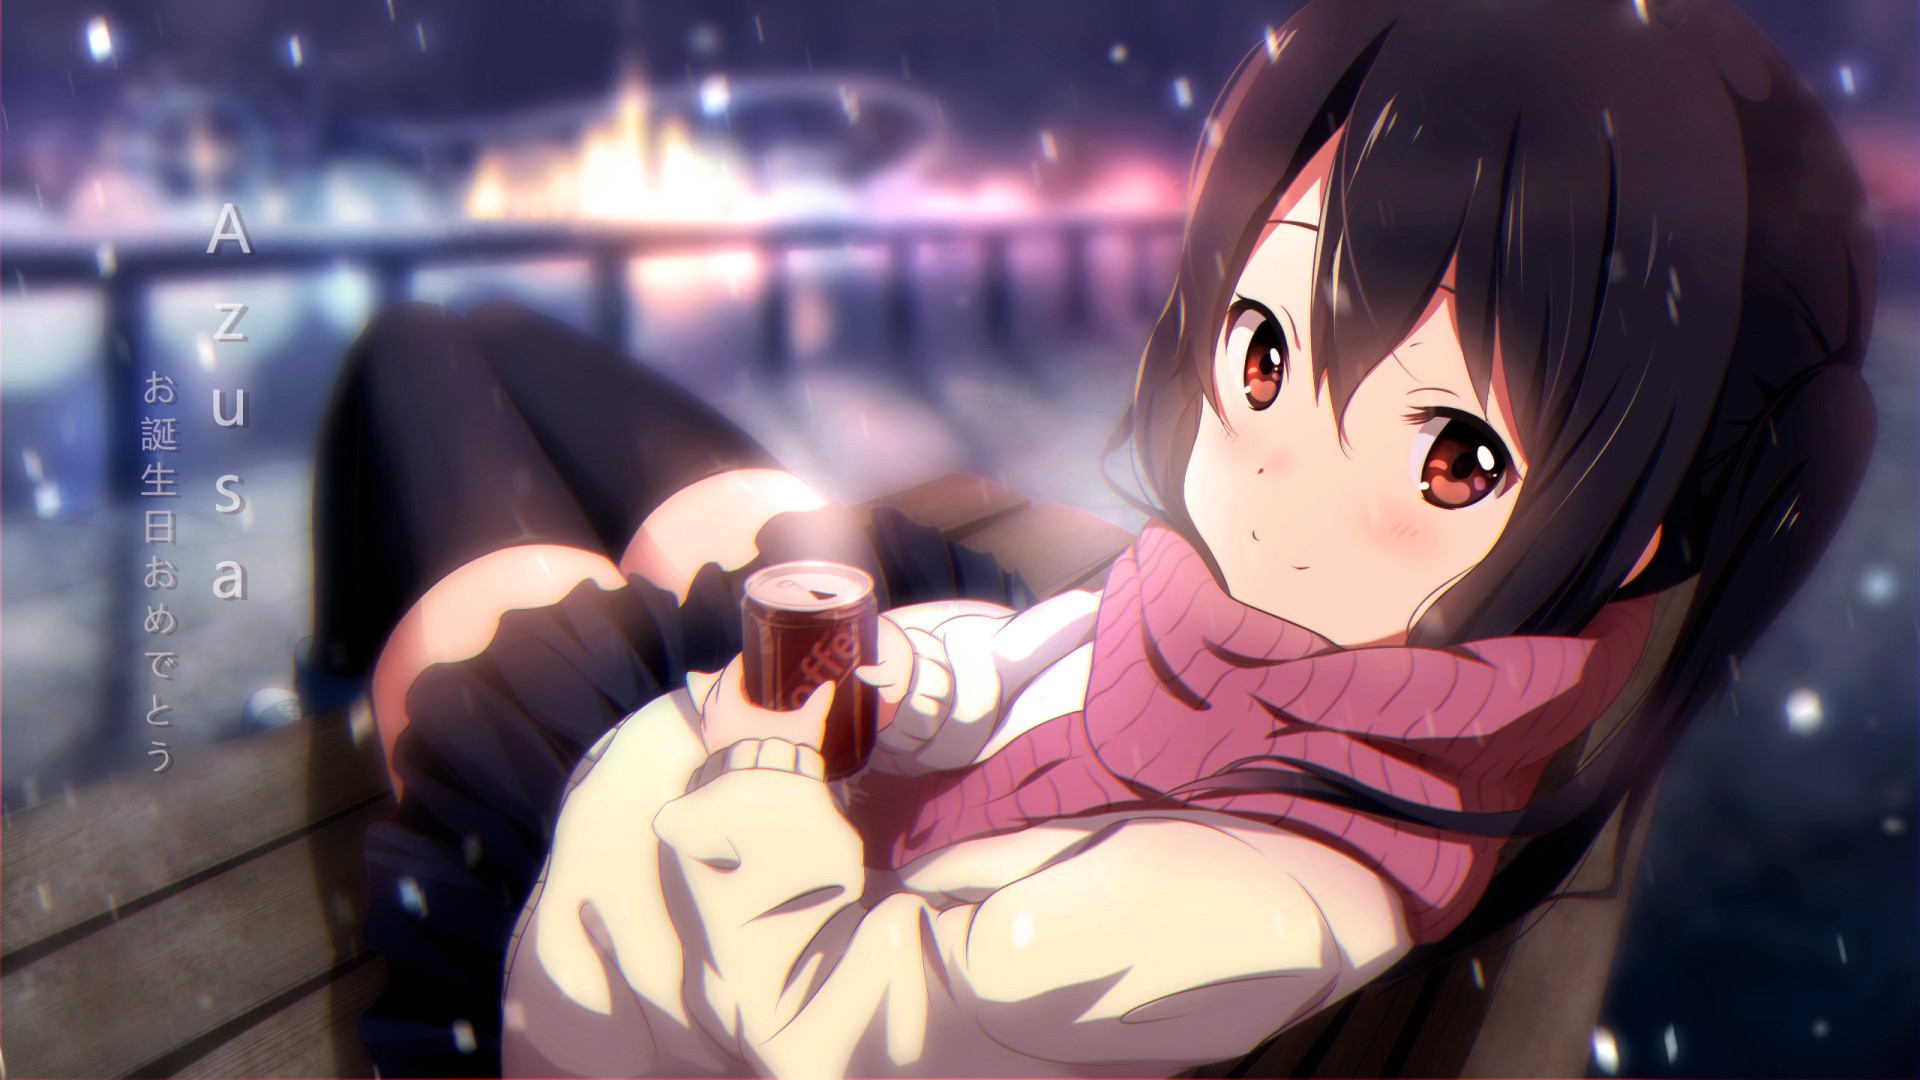 Anime 1920x1080 anime girls K-ON! anime Pixiv can coffee red eyes stockings black stockings knees together looking at viewer urban women outdoors dark hair Nakano Azusa